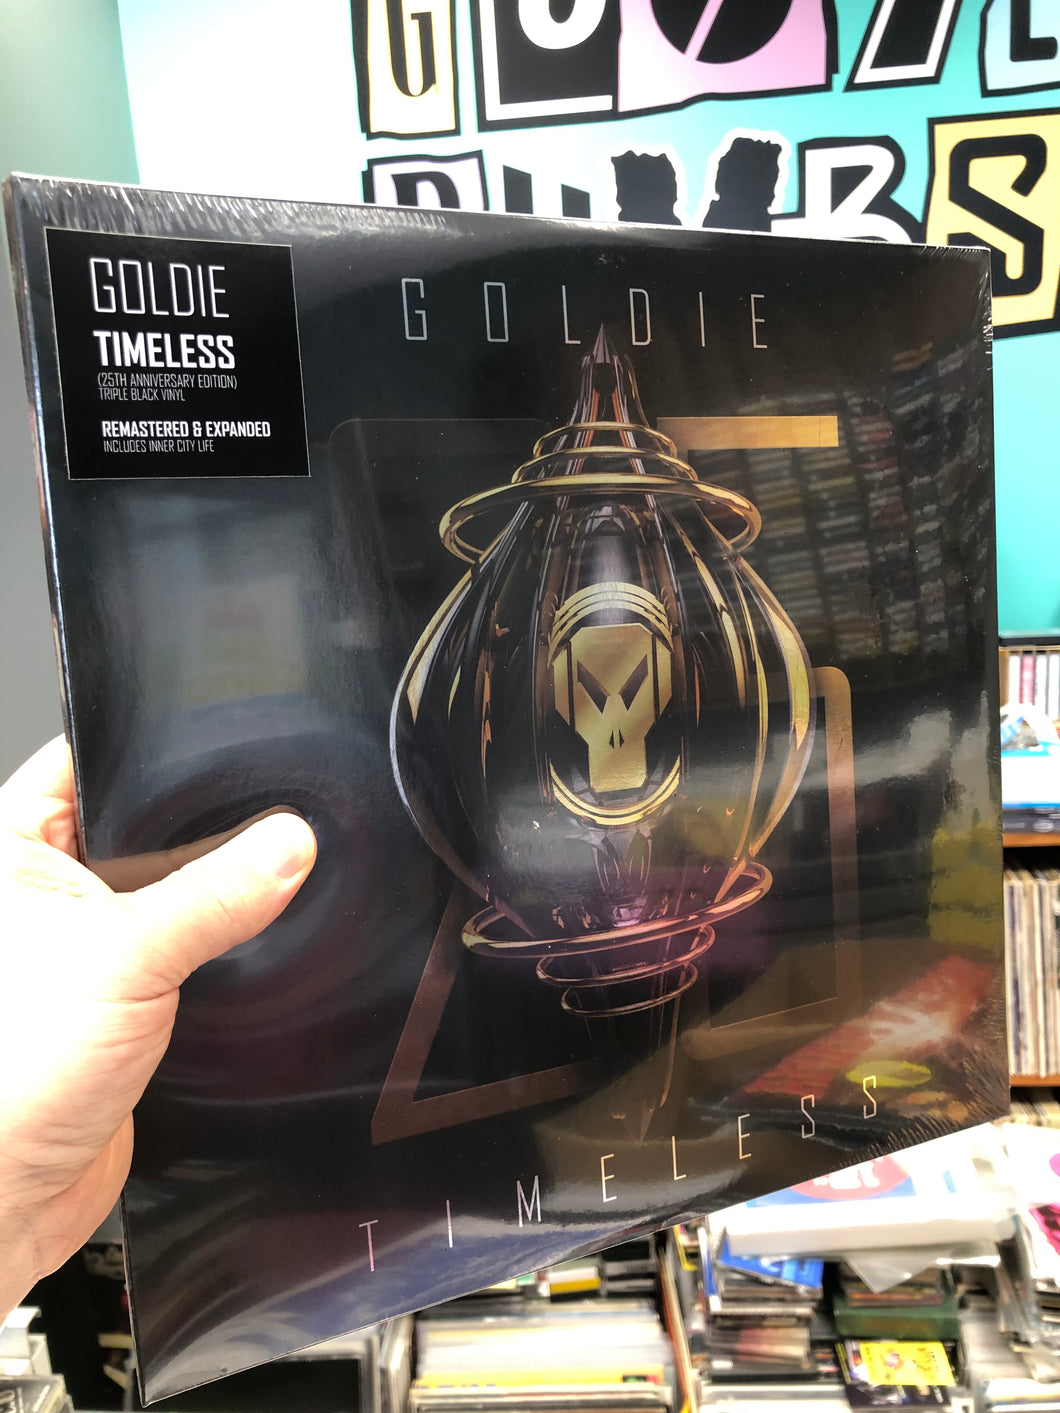 Goldie: Timeless, 25th Anniversary Edition, 3LP